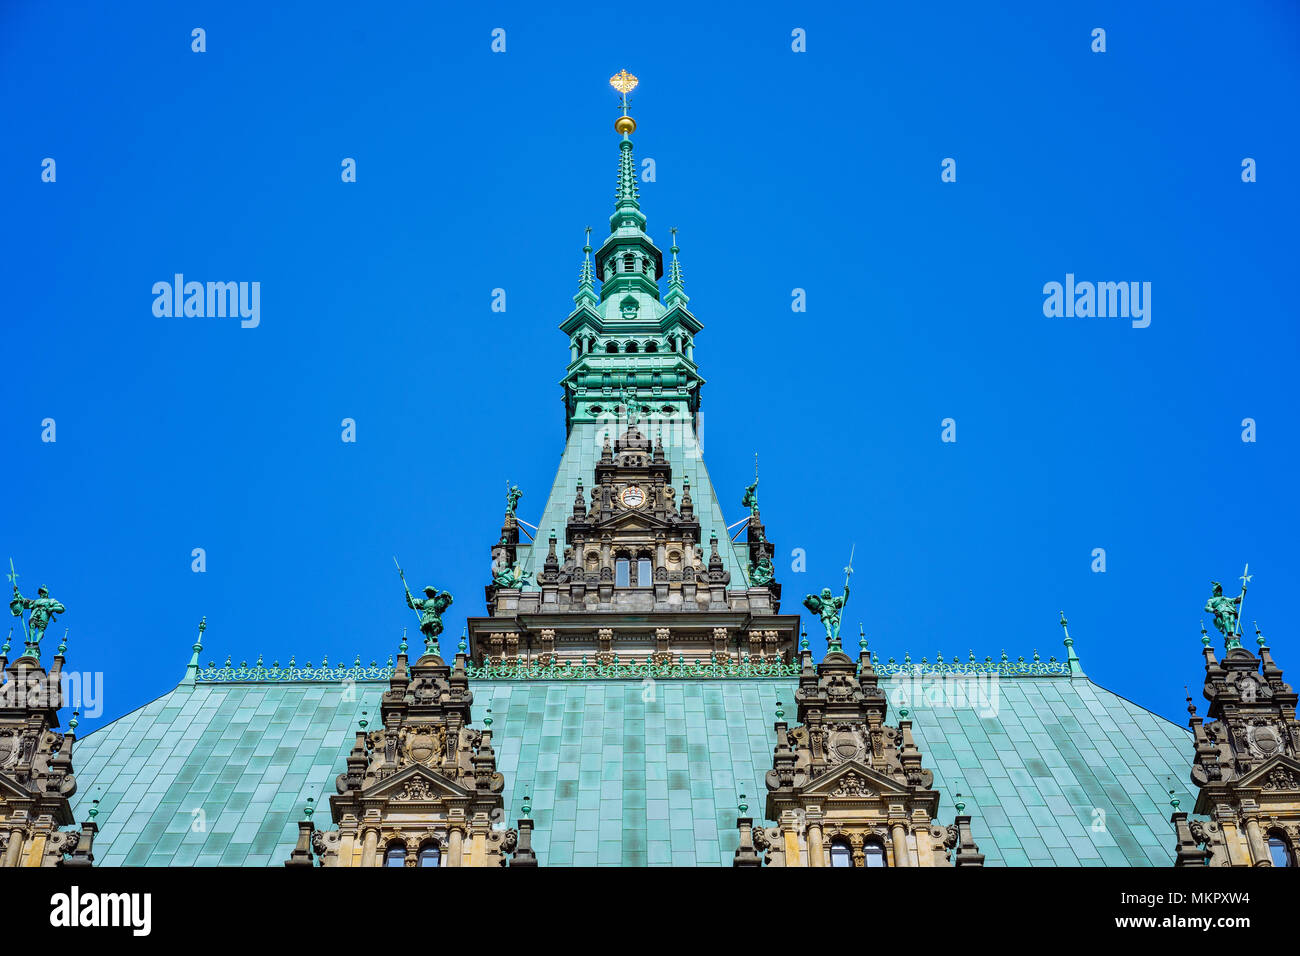 Decorated emerald colored roof and facade of the beautiful famous Rathaus Hamburg town hall in Altstadt quarter, Hamburg, Germany Stock Photo